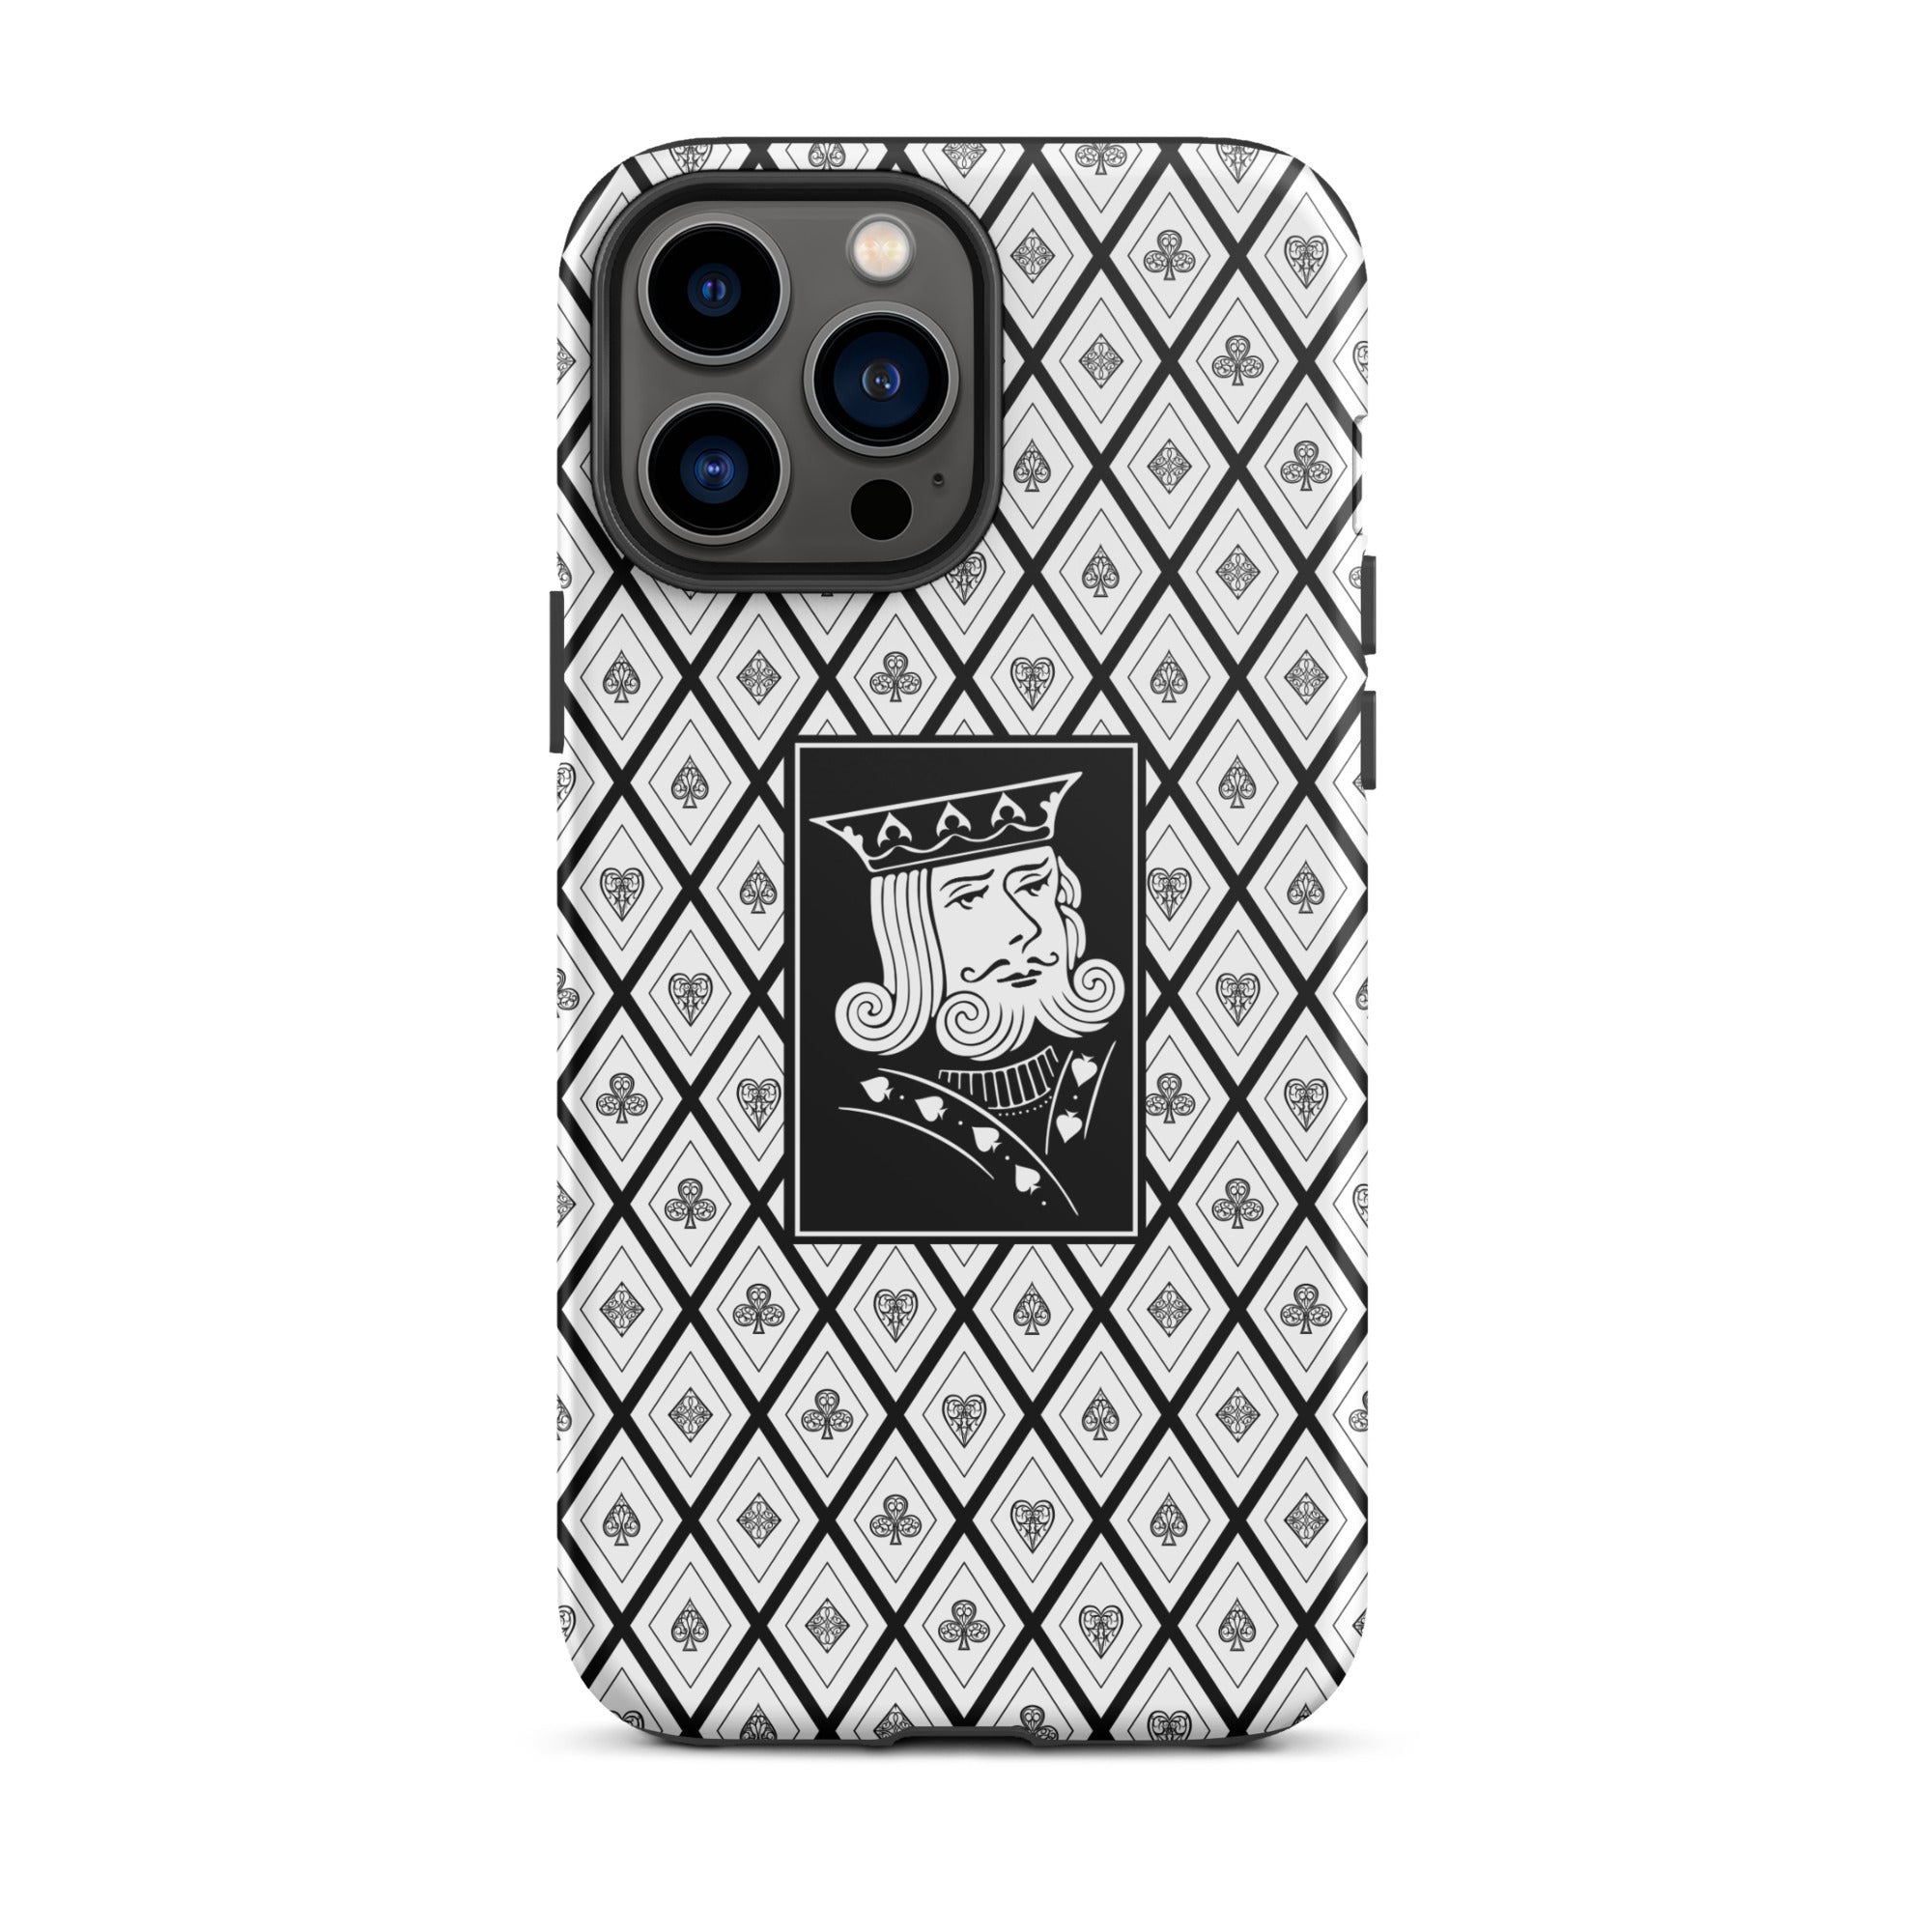 Fulton's Playing Cards King Emblem iPhone Case